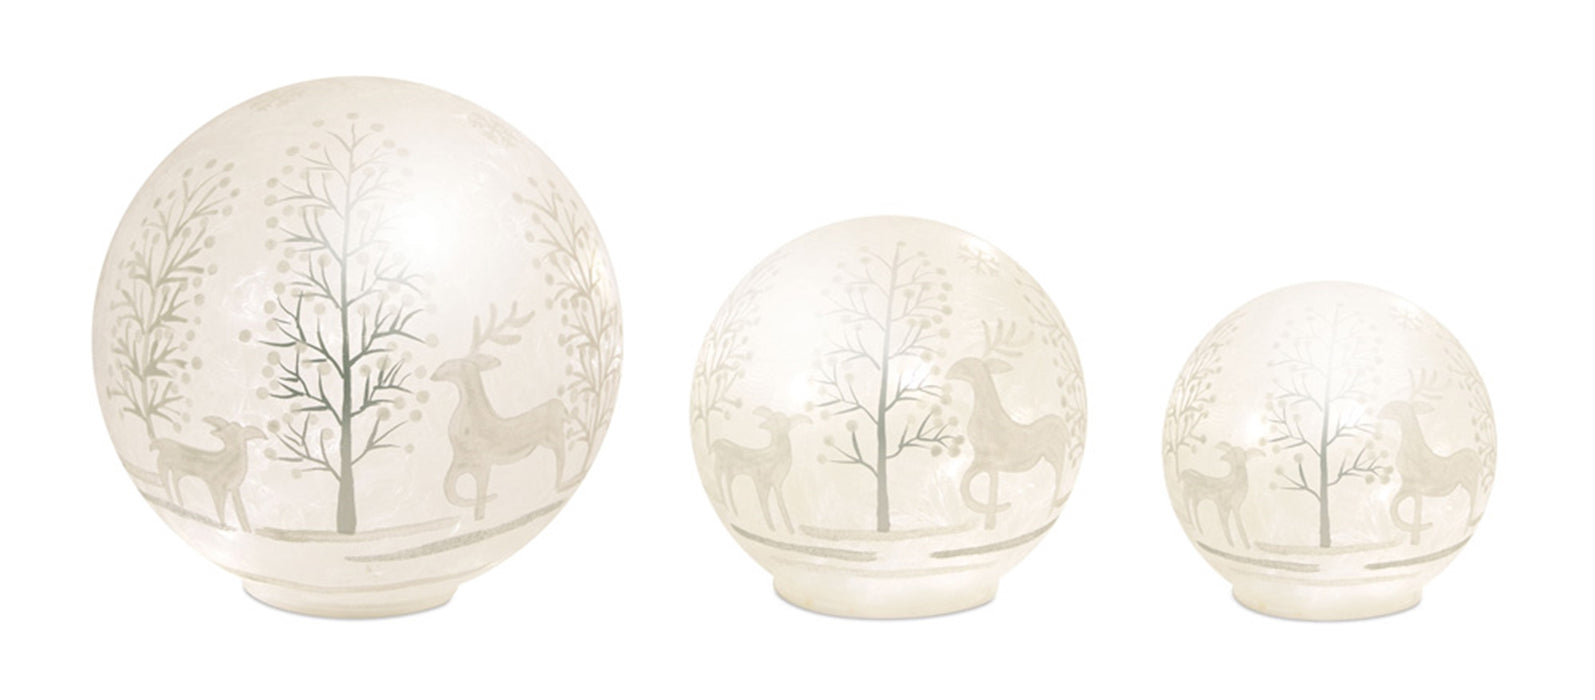 HYGGE CAVE | DEER AND TREE GLOBE/TIMER (SET OF 3)